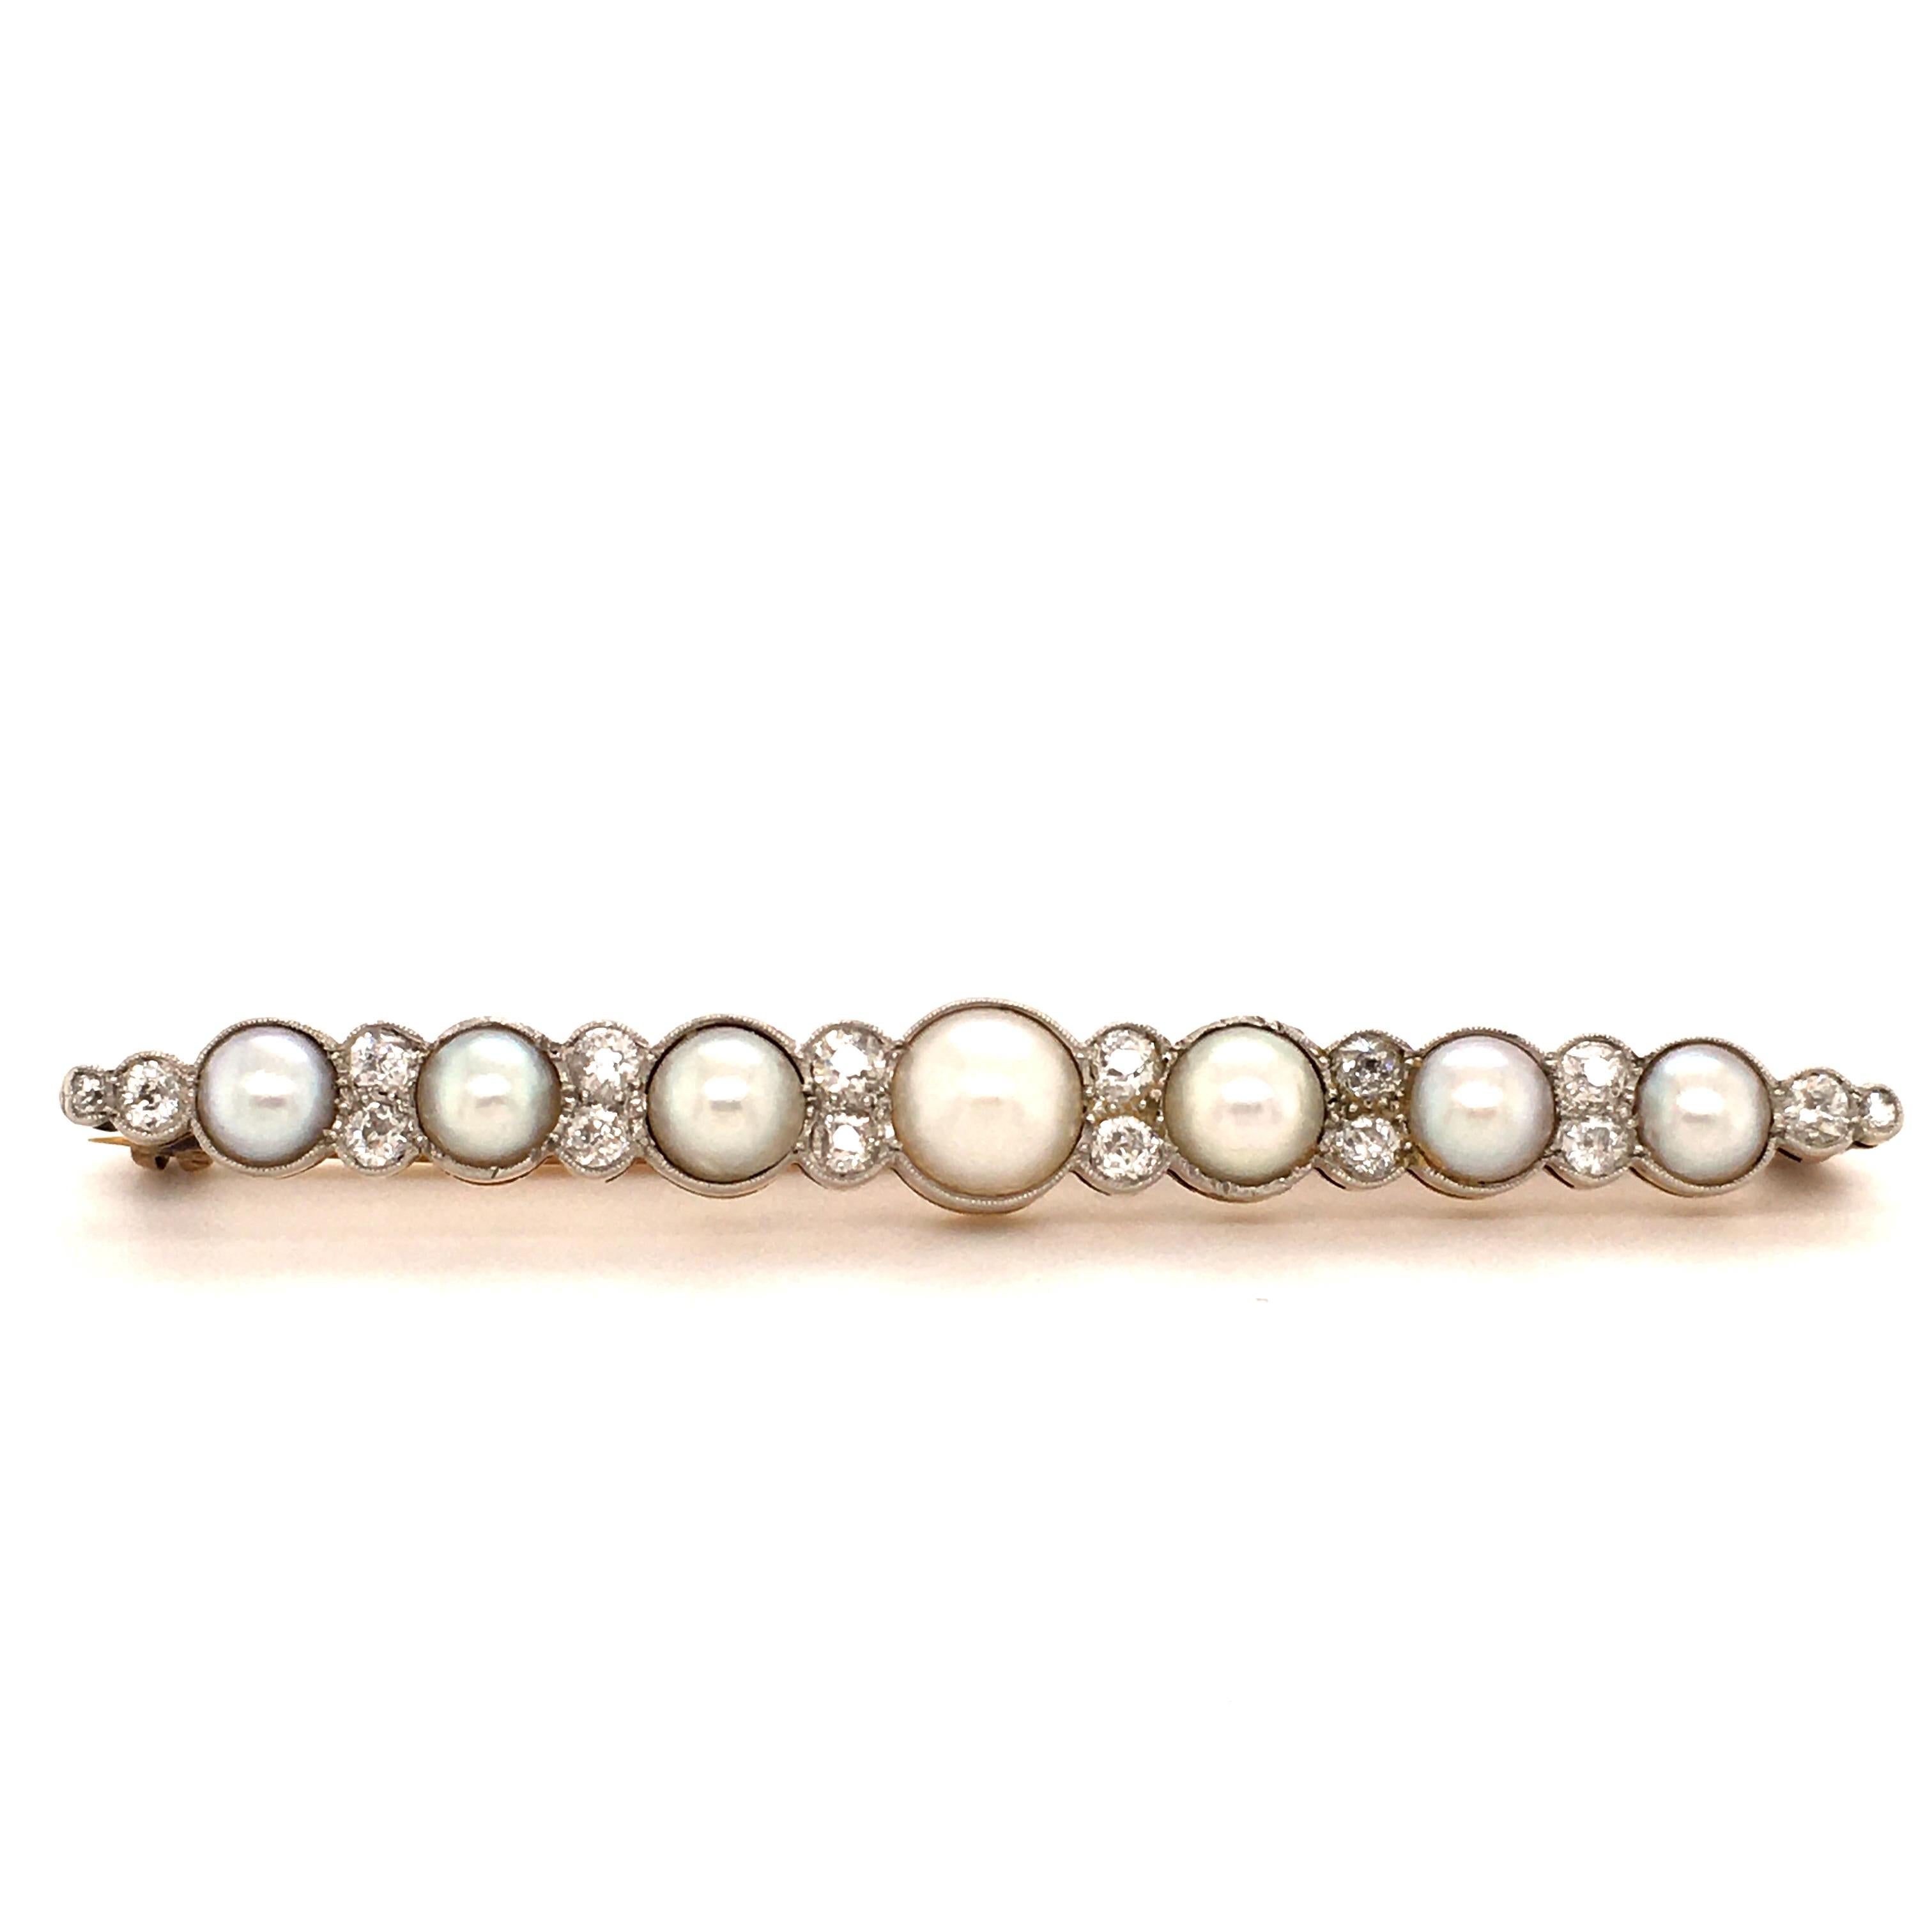 Women's or Men's Bar Brooch with Old Cut Diamonds and Natural Half Pearls For Sale